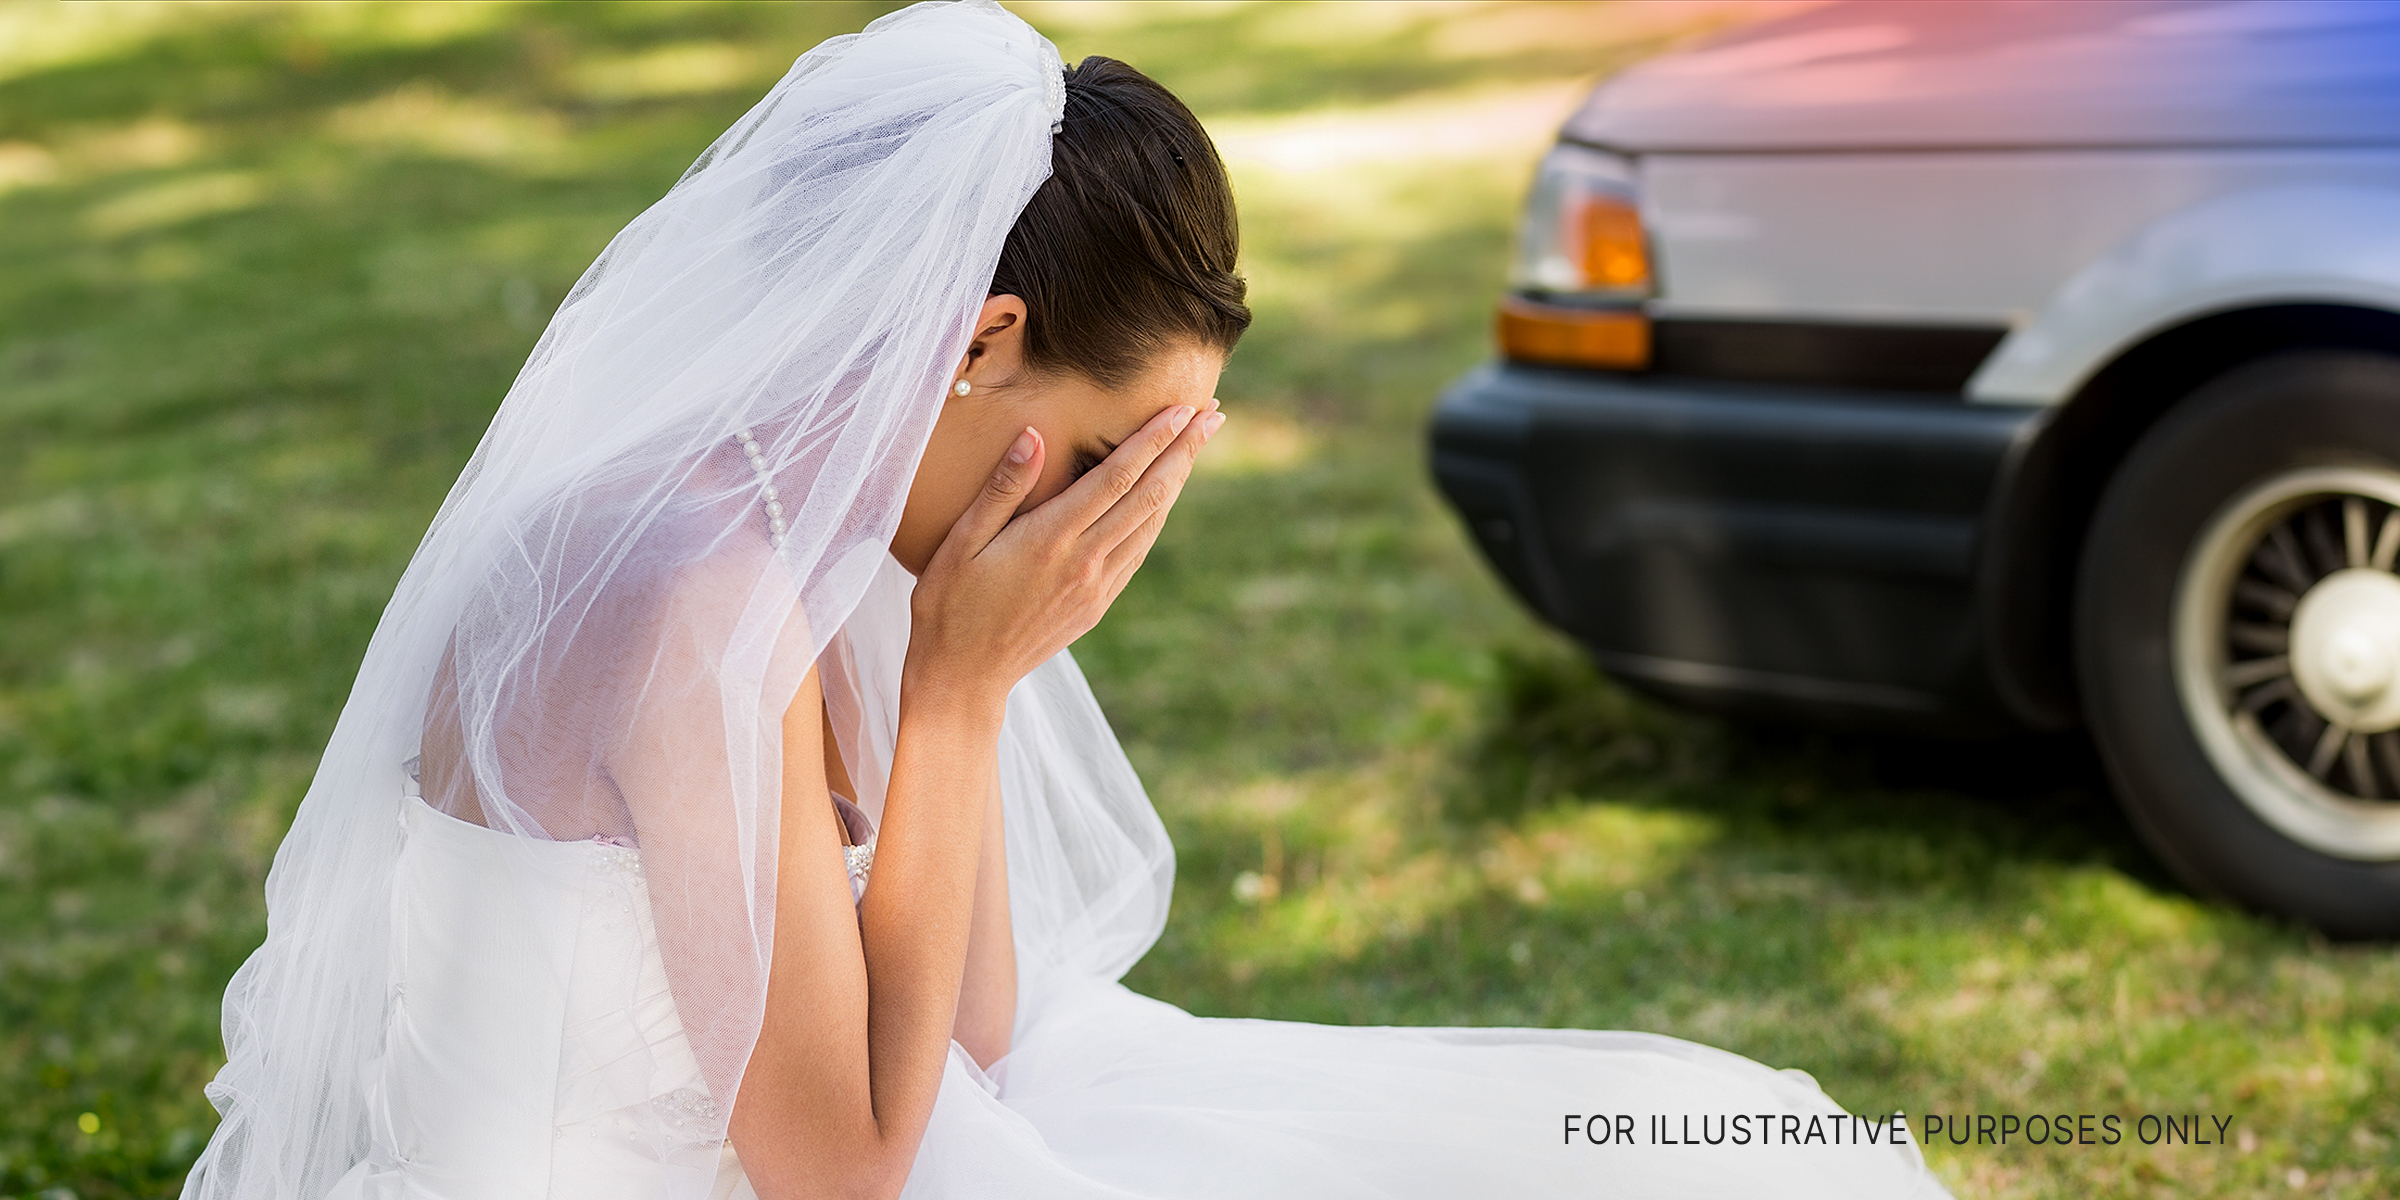 A bride sitting outdoors with her face buried in her hands | Source: Shutterstock